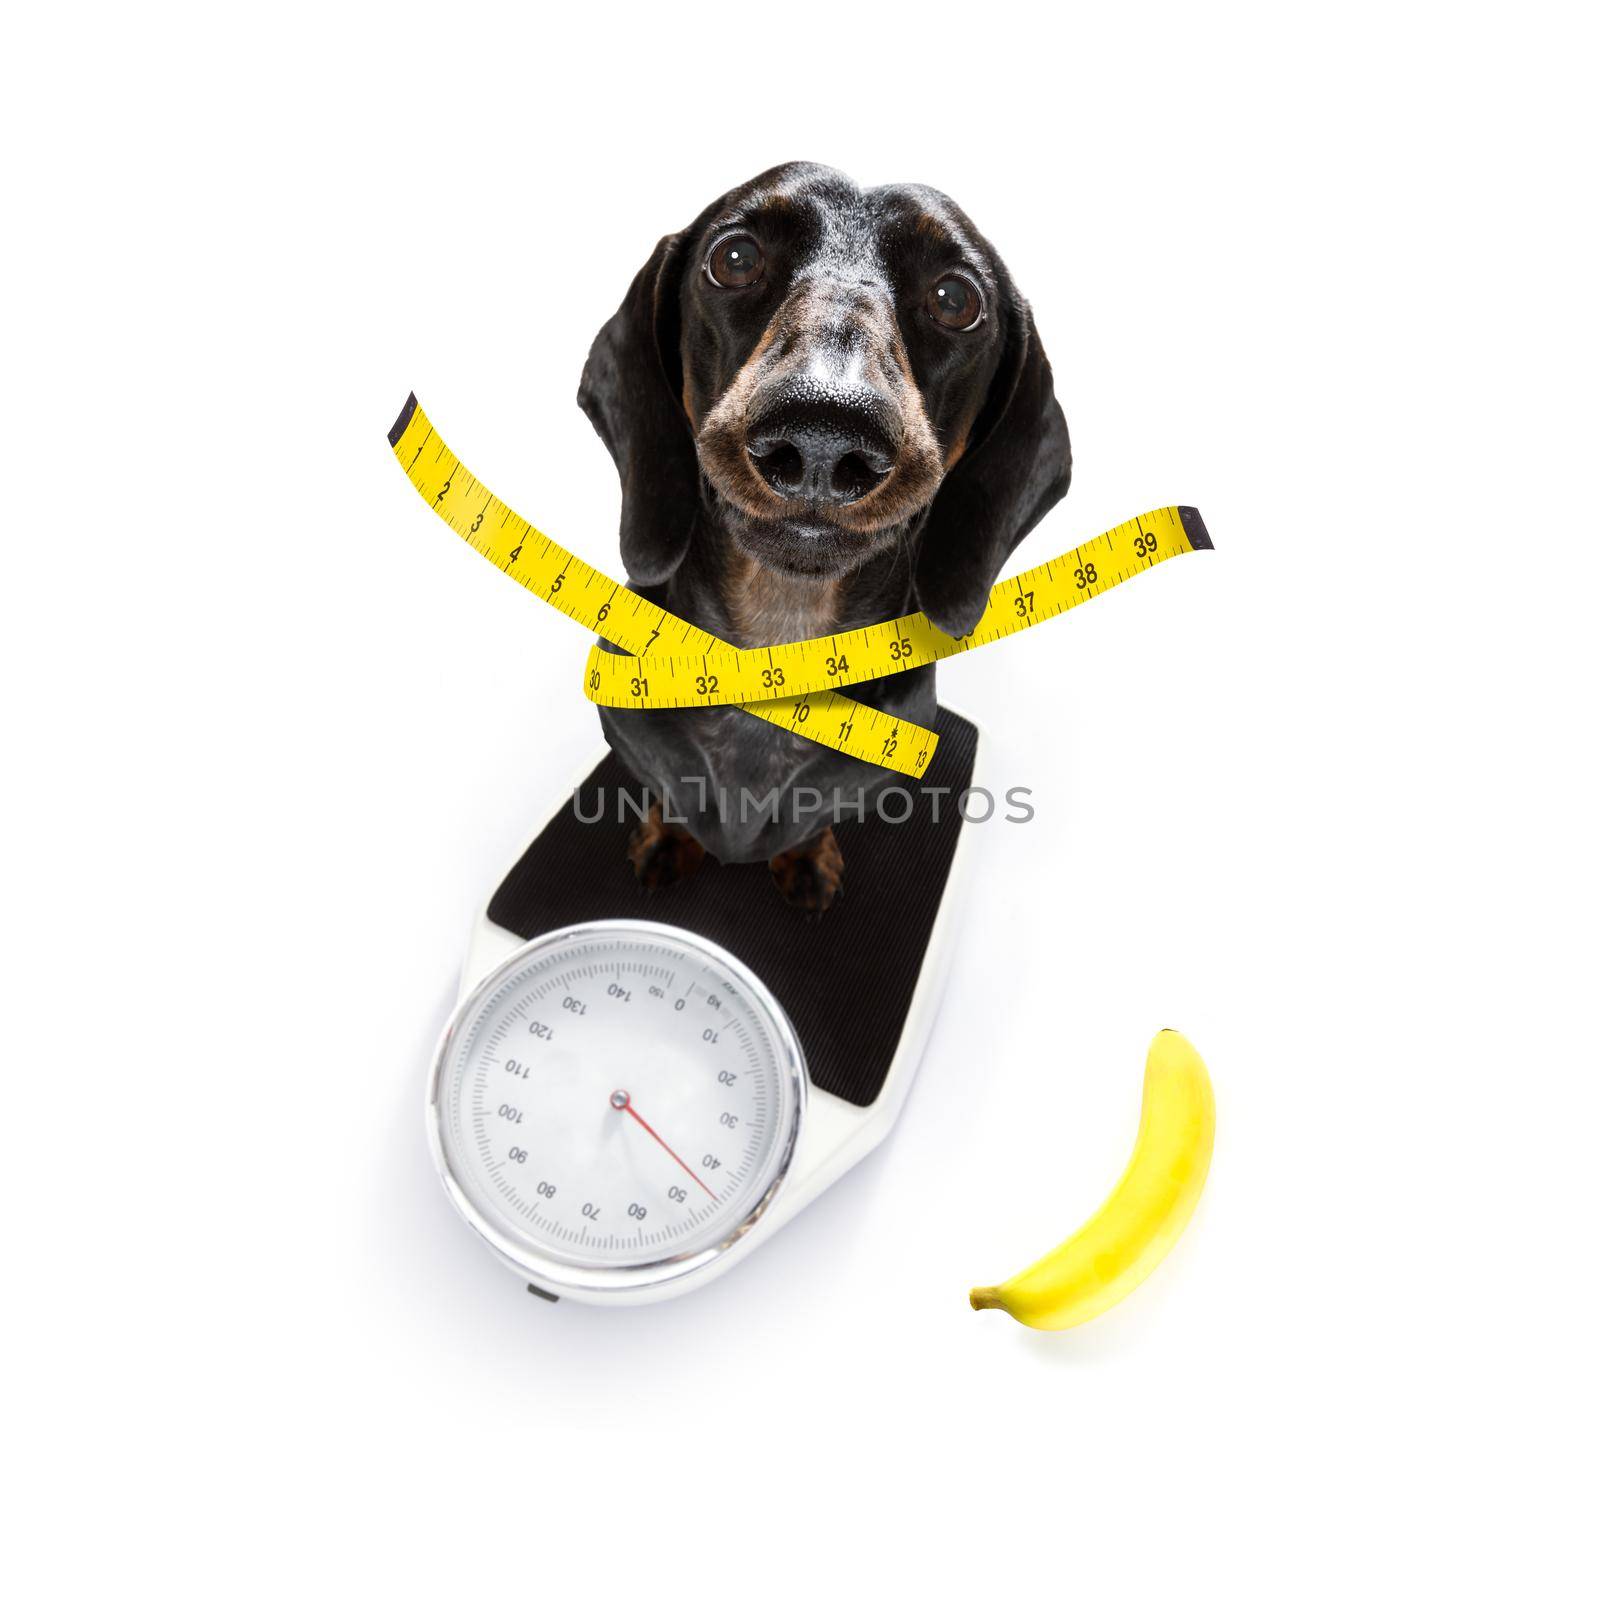 sausage dog with guilty conscience  for overweight, and to loose weight , standing on a  personal scale, isolated on white background and fresh vegan vegetarian fruit around